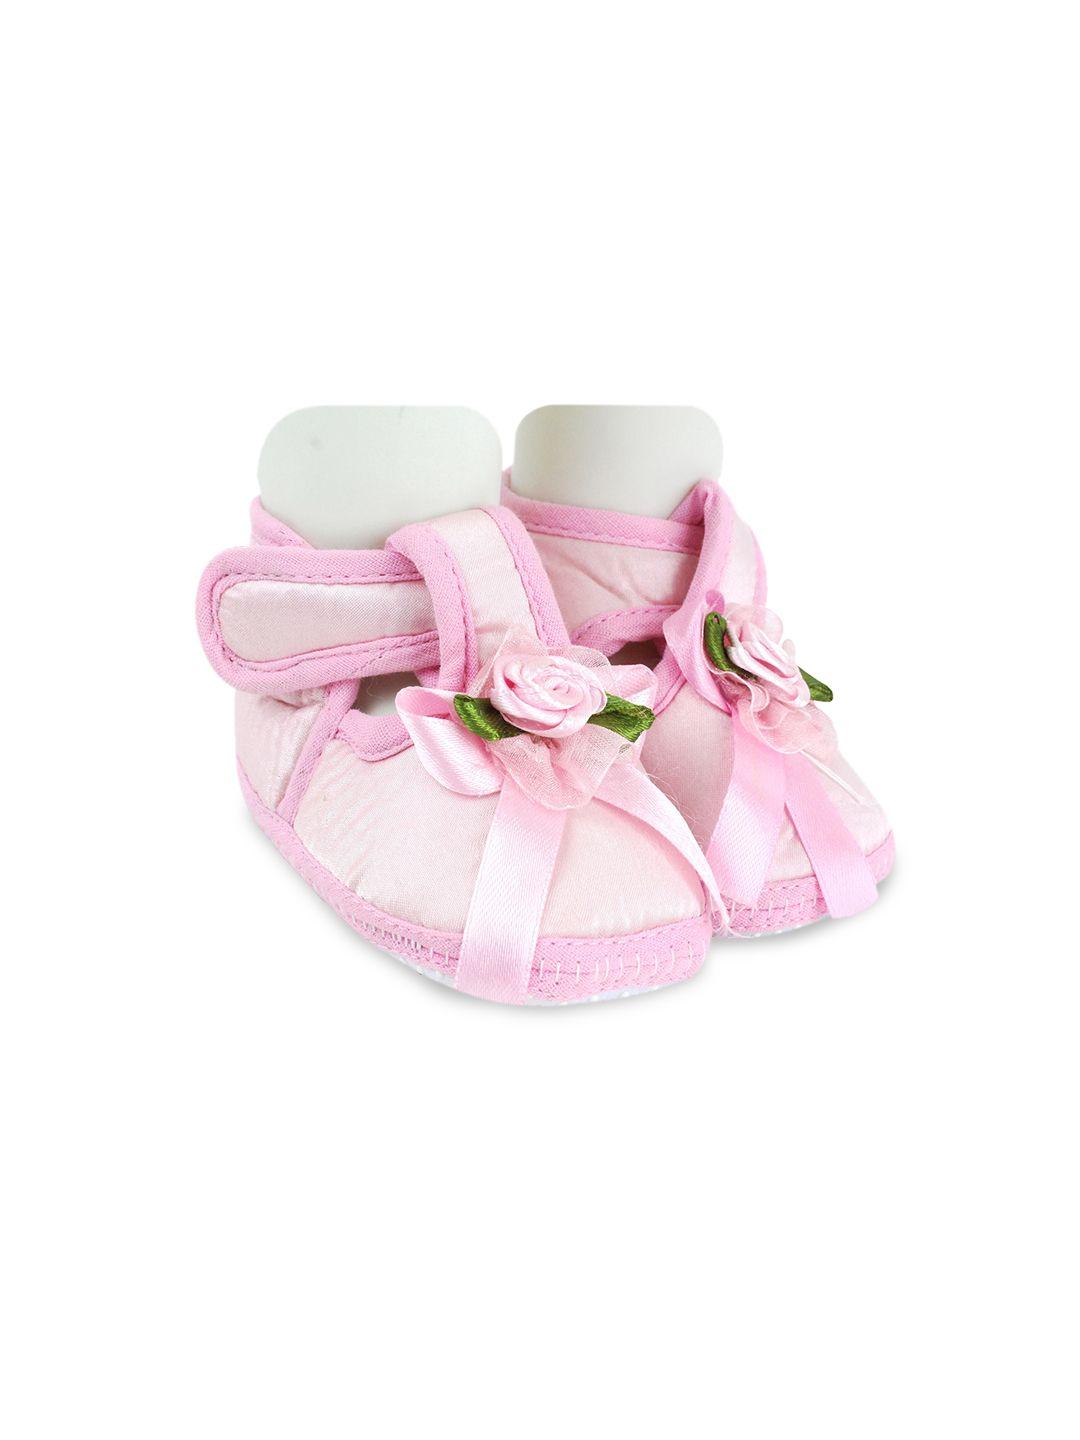 baesd infant girls floral bow embellished satin anti slip booties